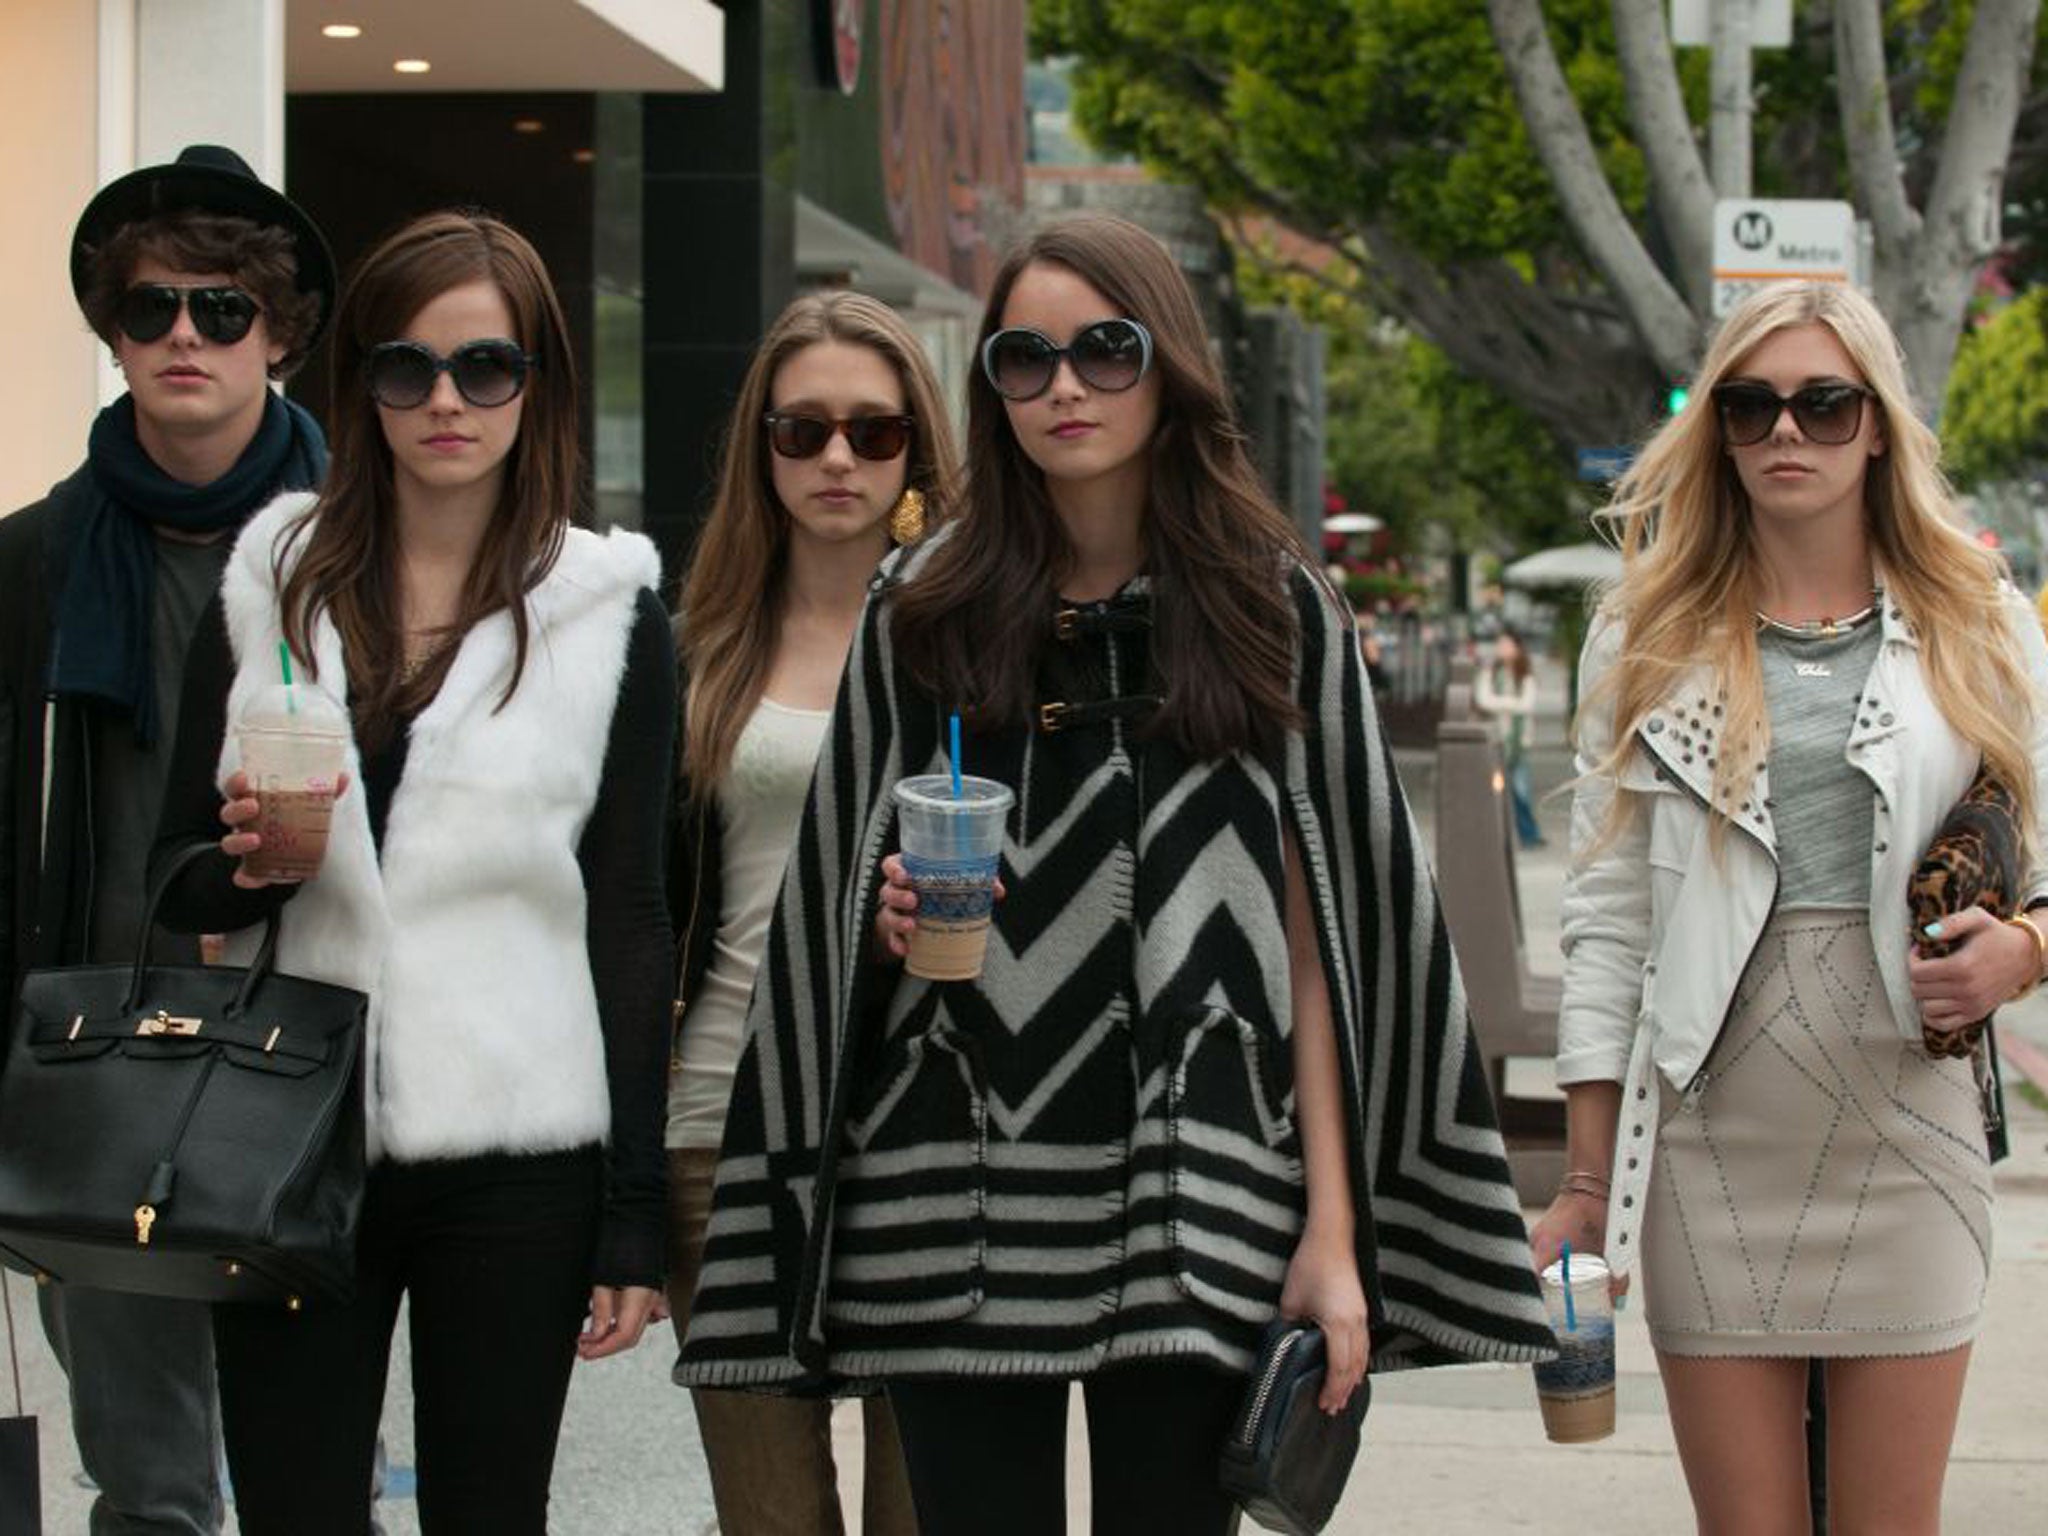 A scene from The Bling Ring, a film based on real-life events which took place in Calabasas